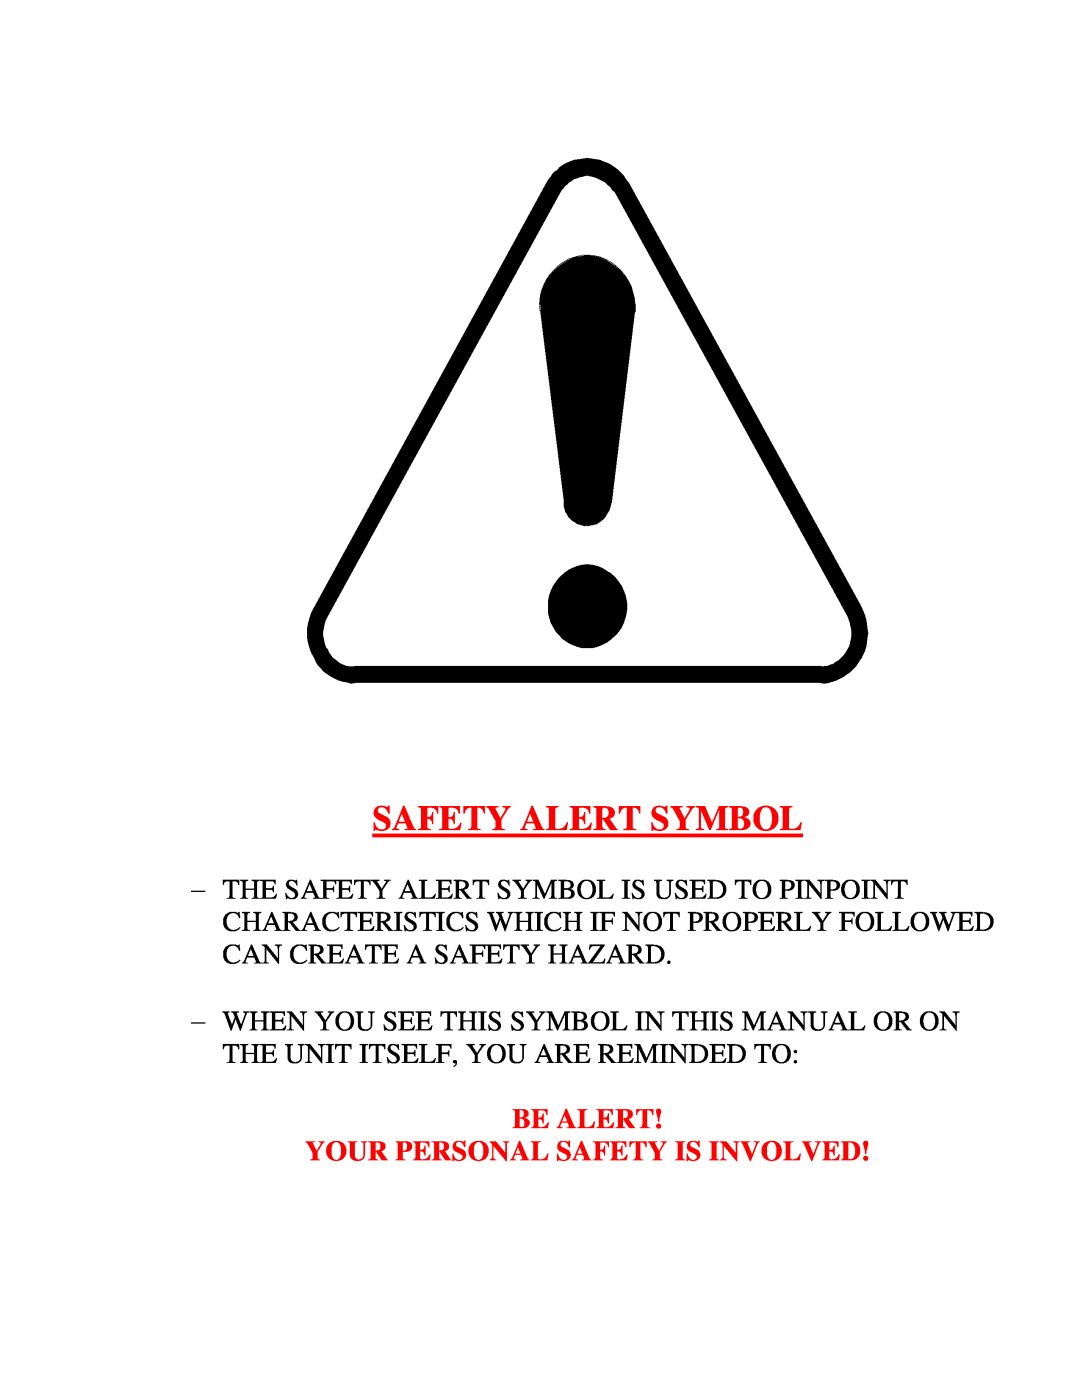 Sioux Tools 2050 manual Safety Alert Symbol, Be Alert Your Personal Safety Is Involved 